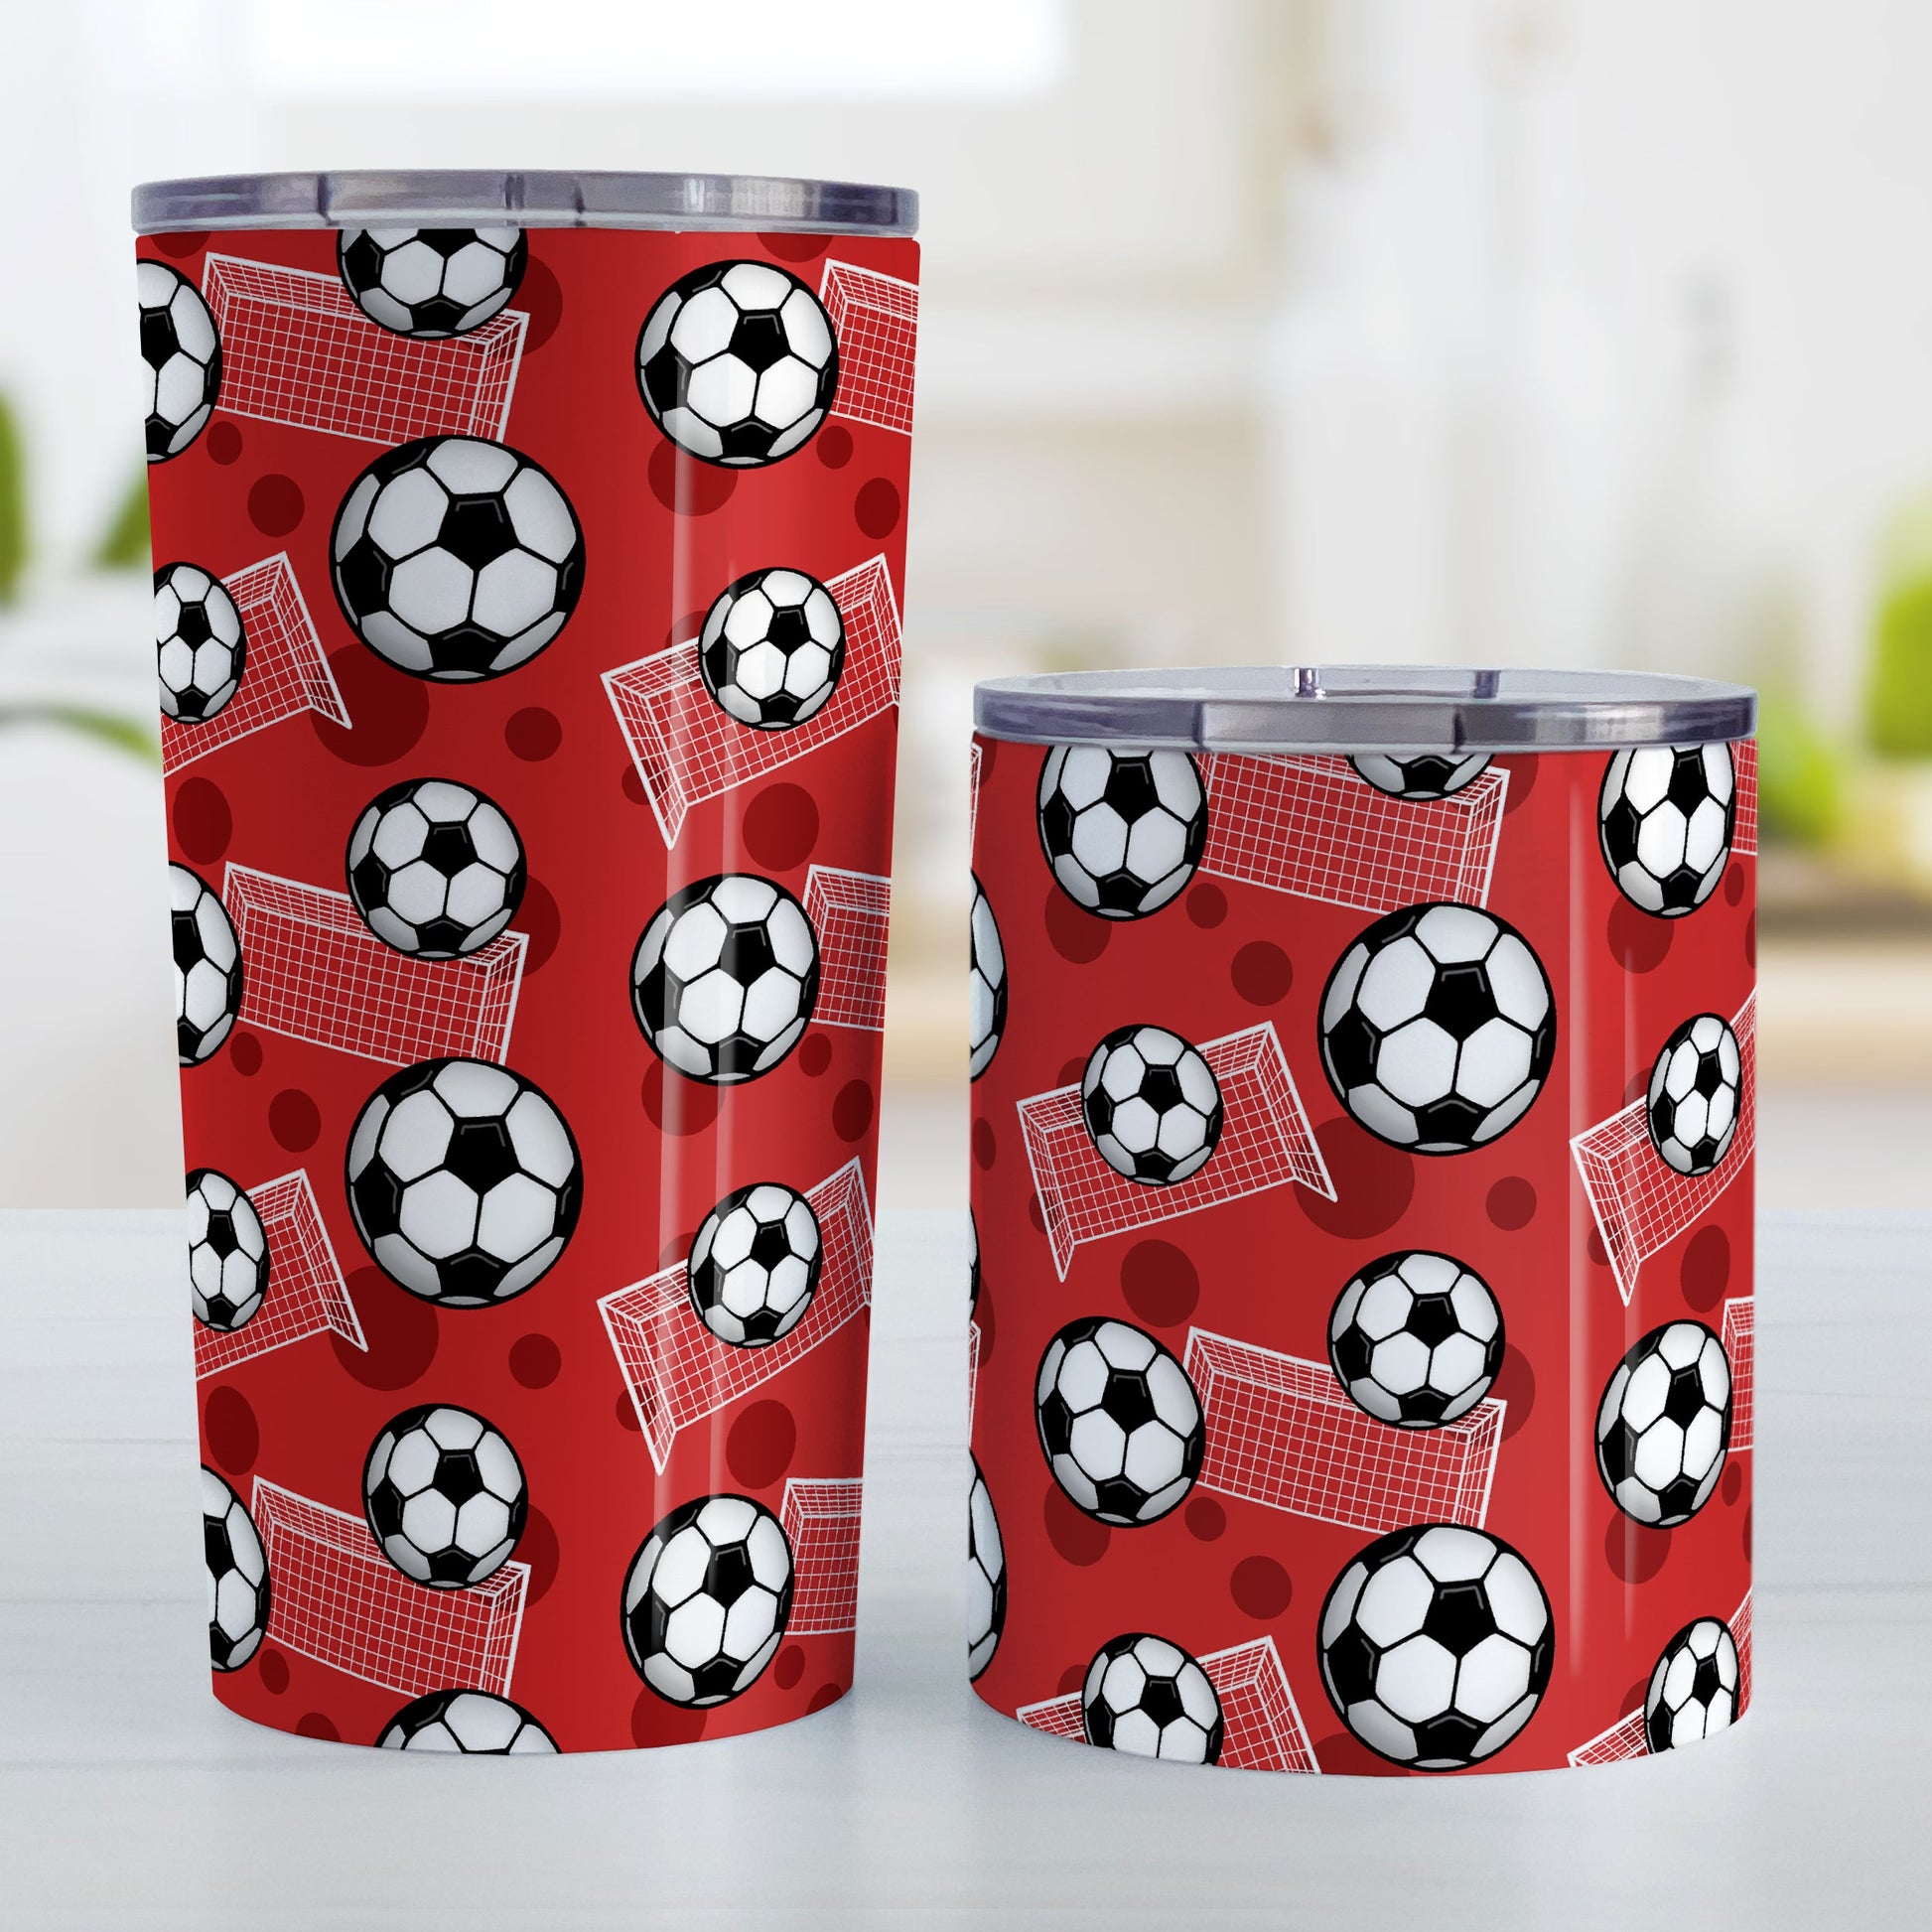 Soccer Ball and Goal Pattern Red Tumbler Cup (20oz and 10oz) at Amy's Coffee Mugs. Stainless steel insulated tumbler cups designed with a pattern of soccer balls and goals over a red background that wraps around the cups. These red soccer tumbler cups are perfect for people who love or play soccer. Photo shows both sized cups next to each other.